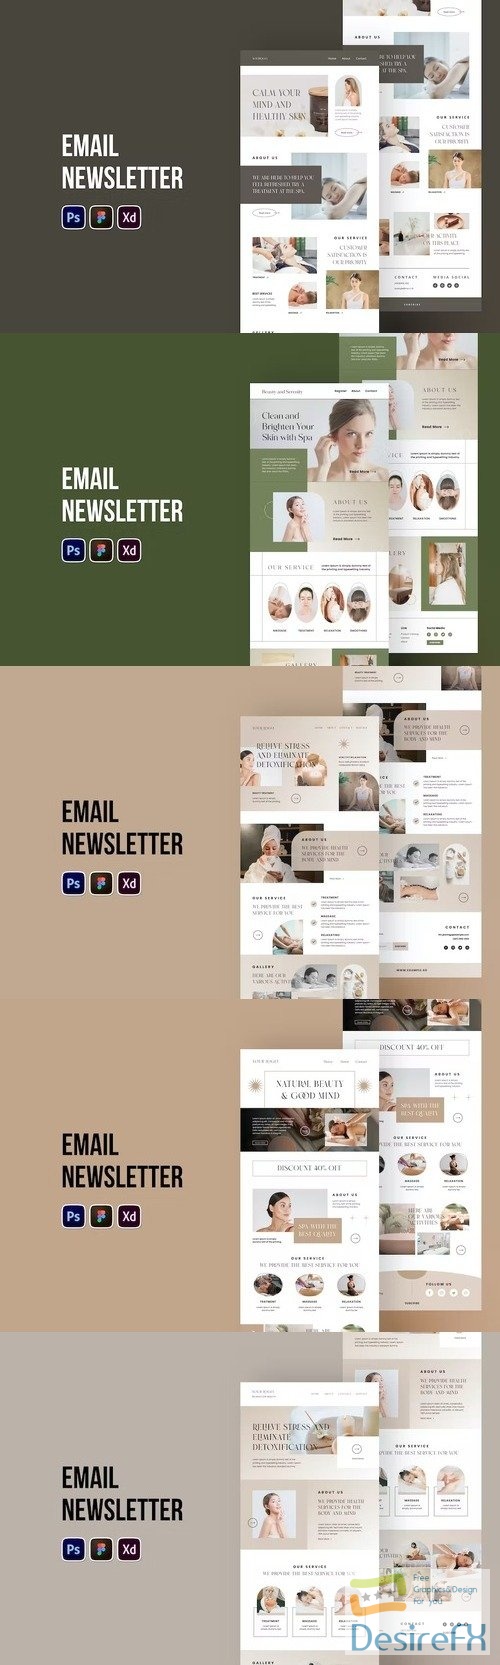 5 Spa Email Newsletter